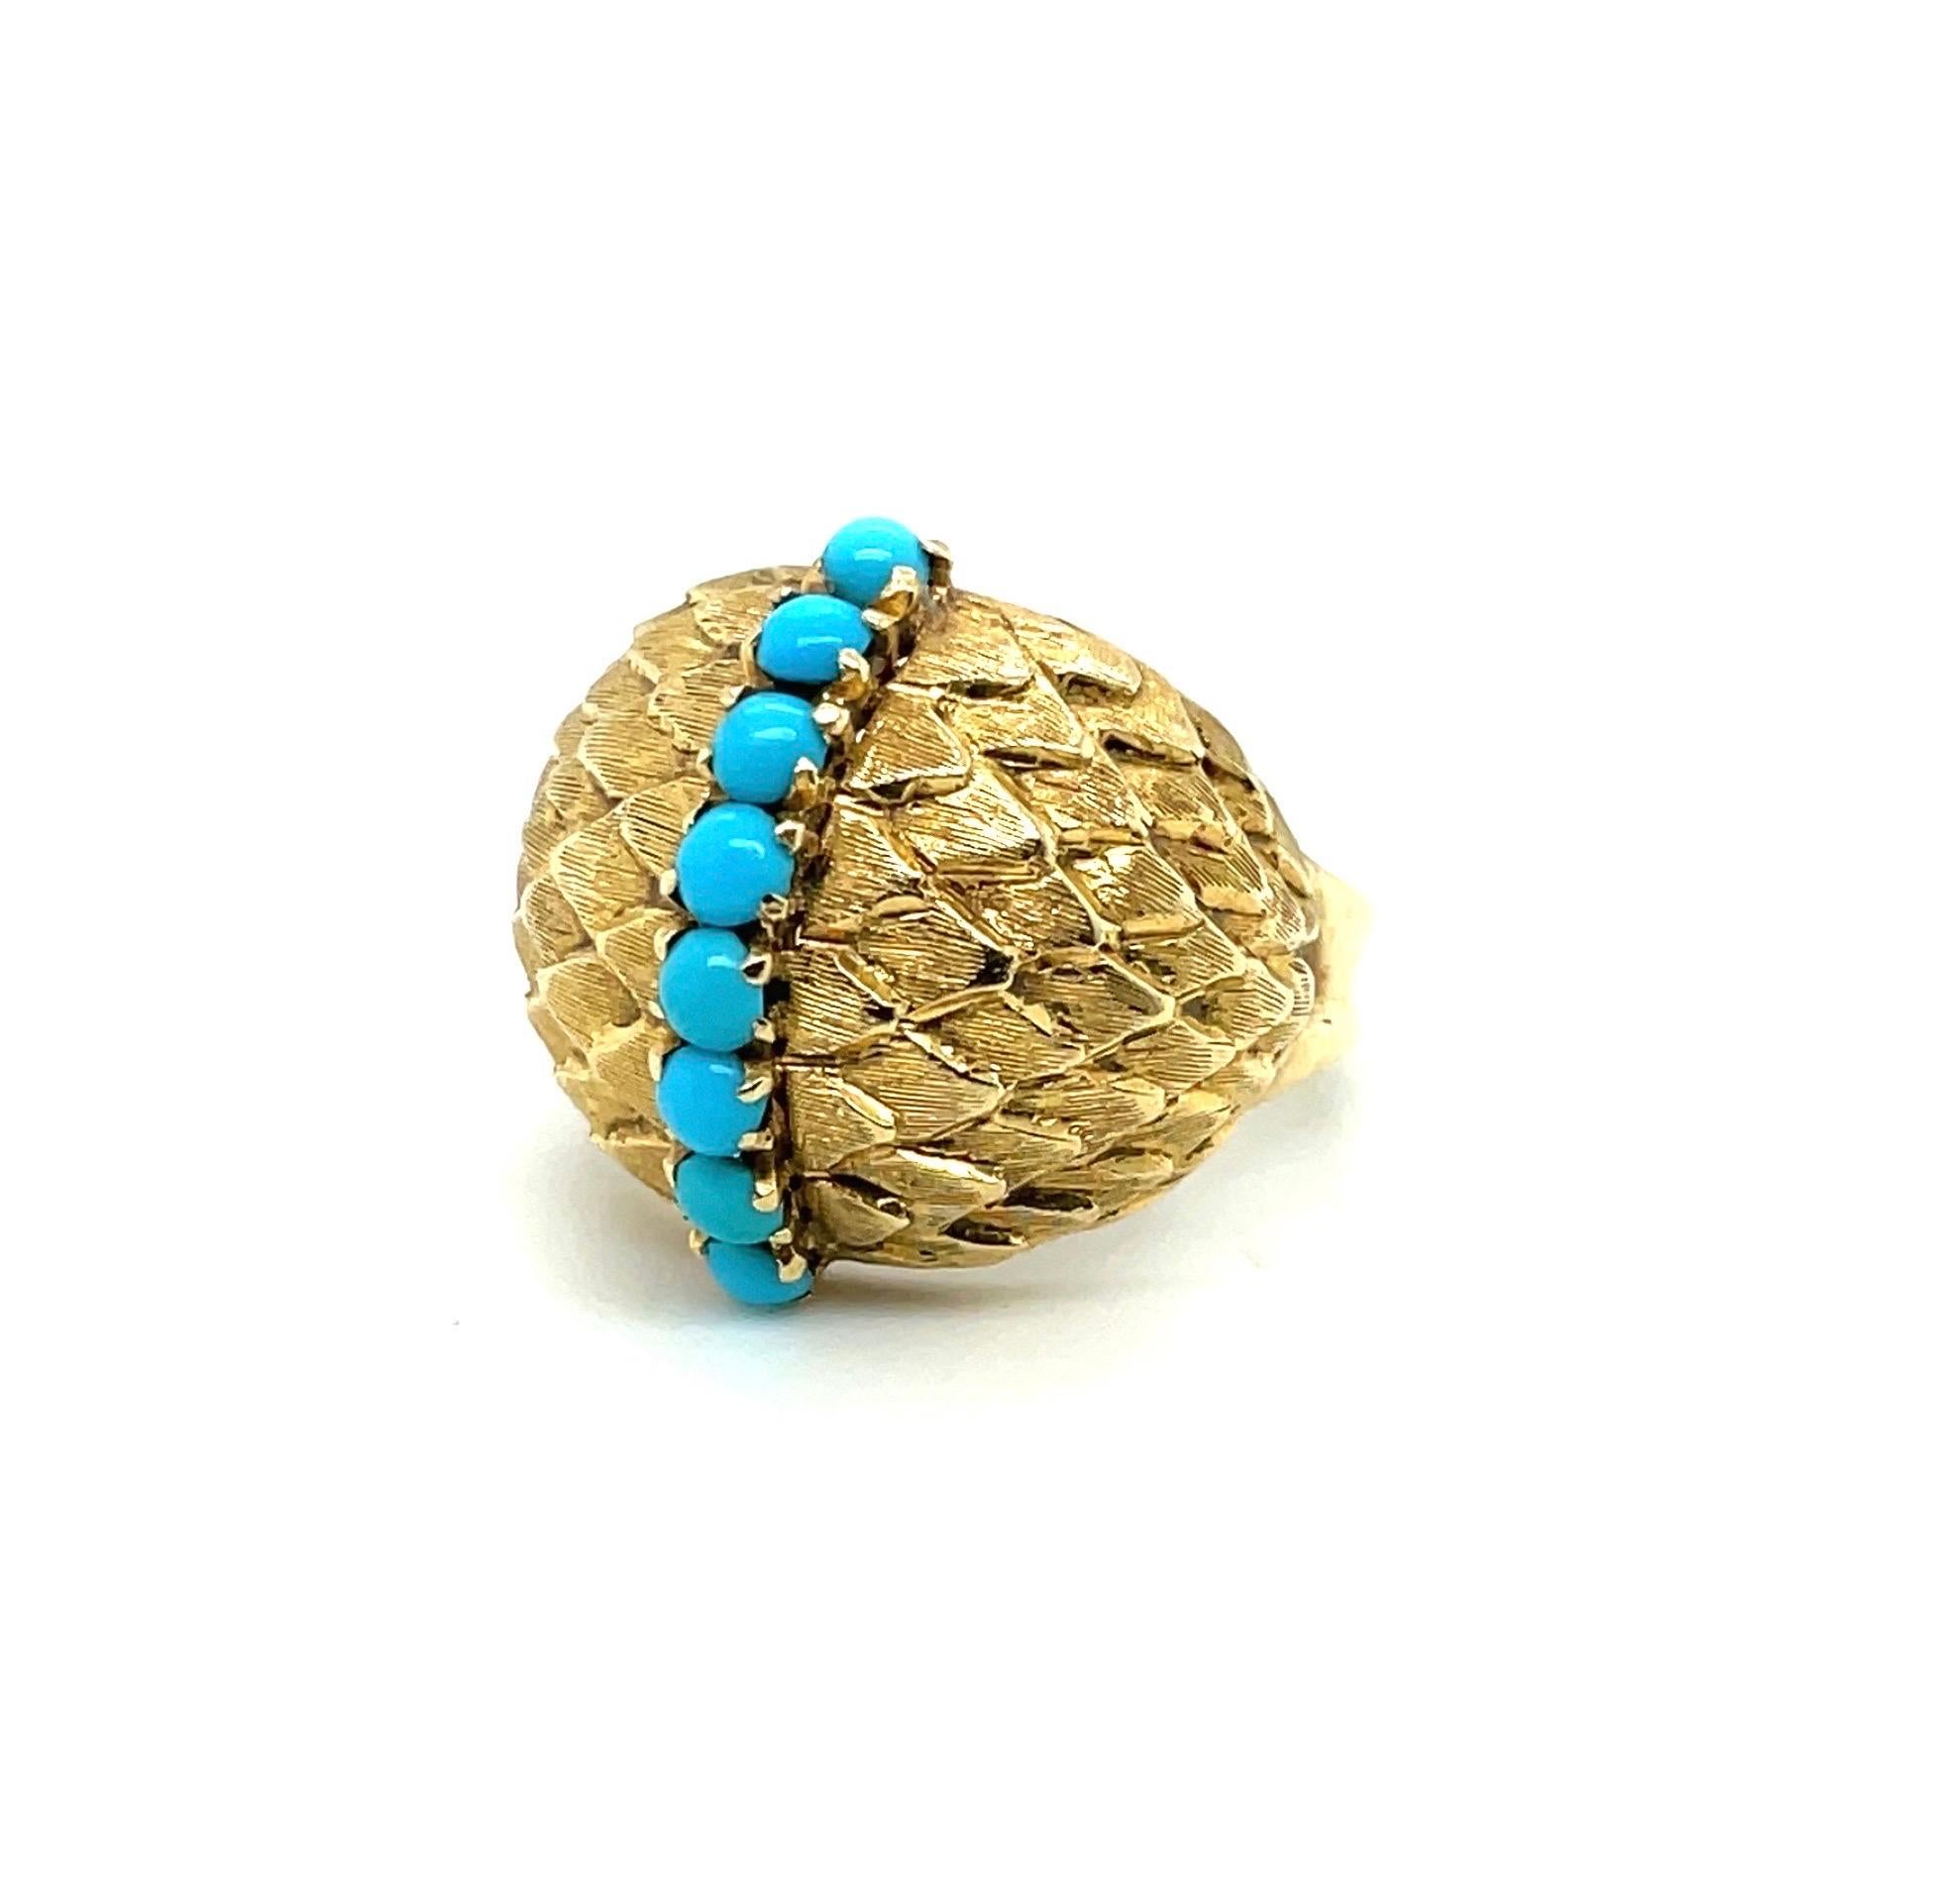 Charming 18 karat yellow gold and turquoise Cocktail ring, circa 1950s. 

Of bombé design, crafted in 18 karat yellow gold and decorated with finely textured, matt-finish, stylised leaf motifs, centering upon a line of 8 round small turquoise